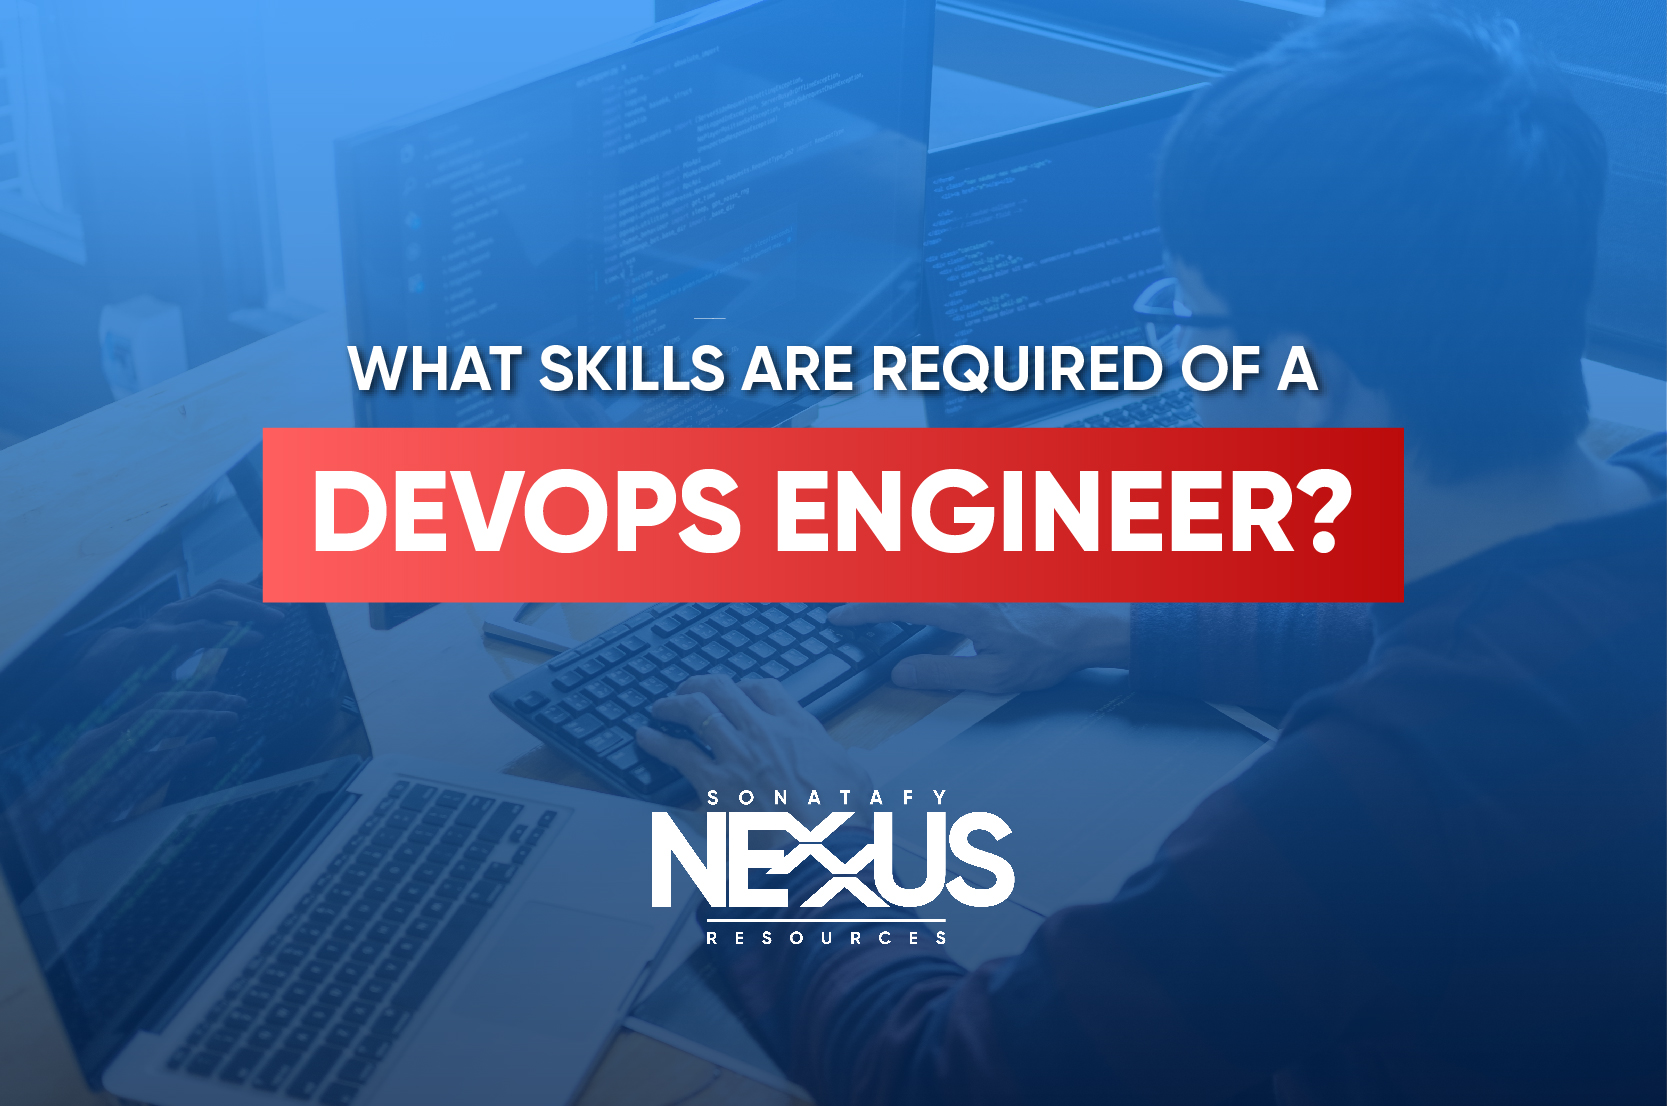 What skills are required of a DevOps engineer?